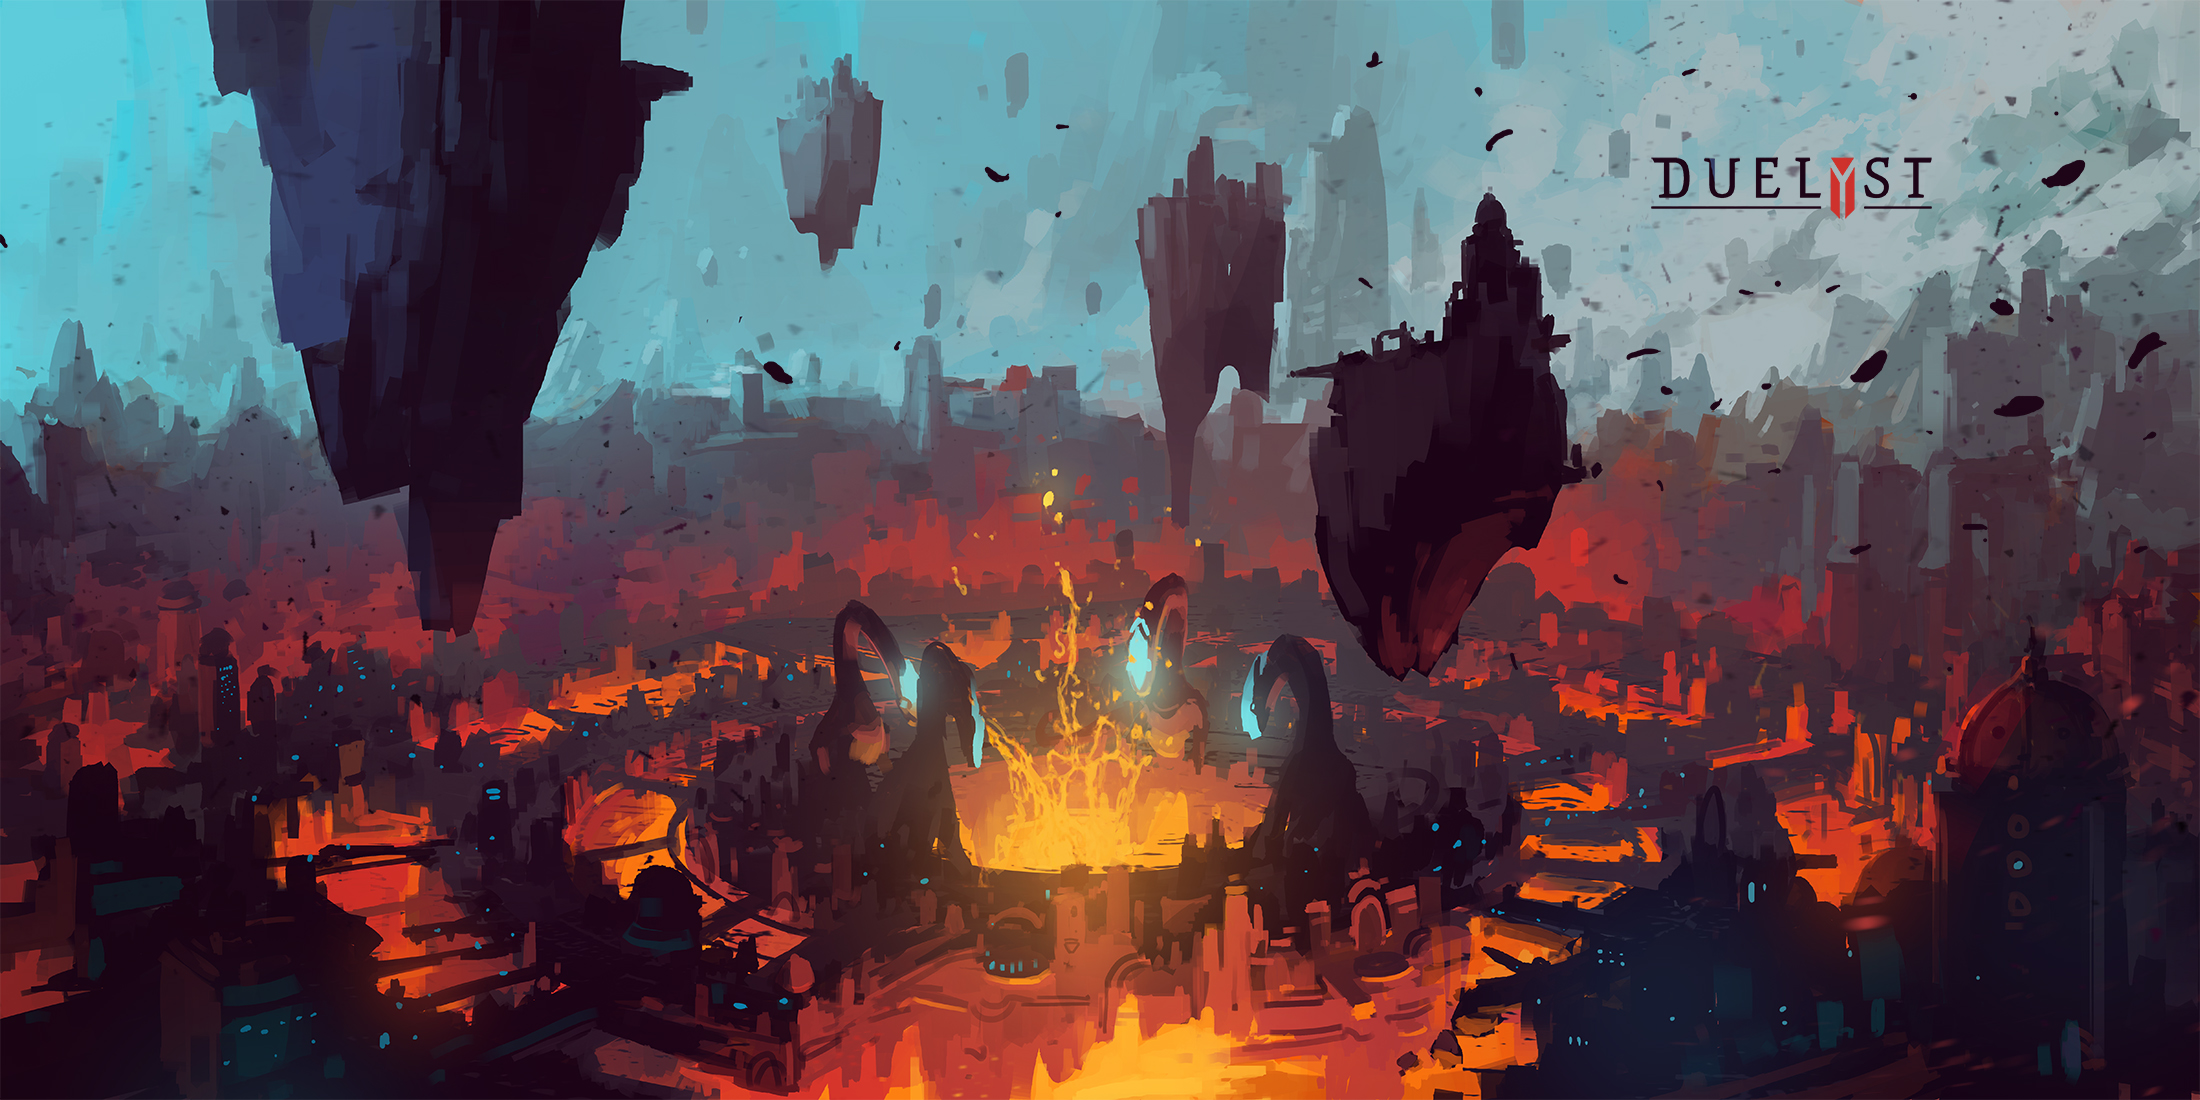 duelyst, video game